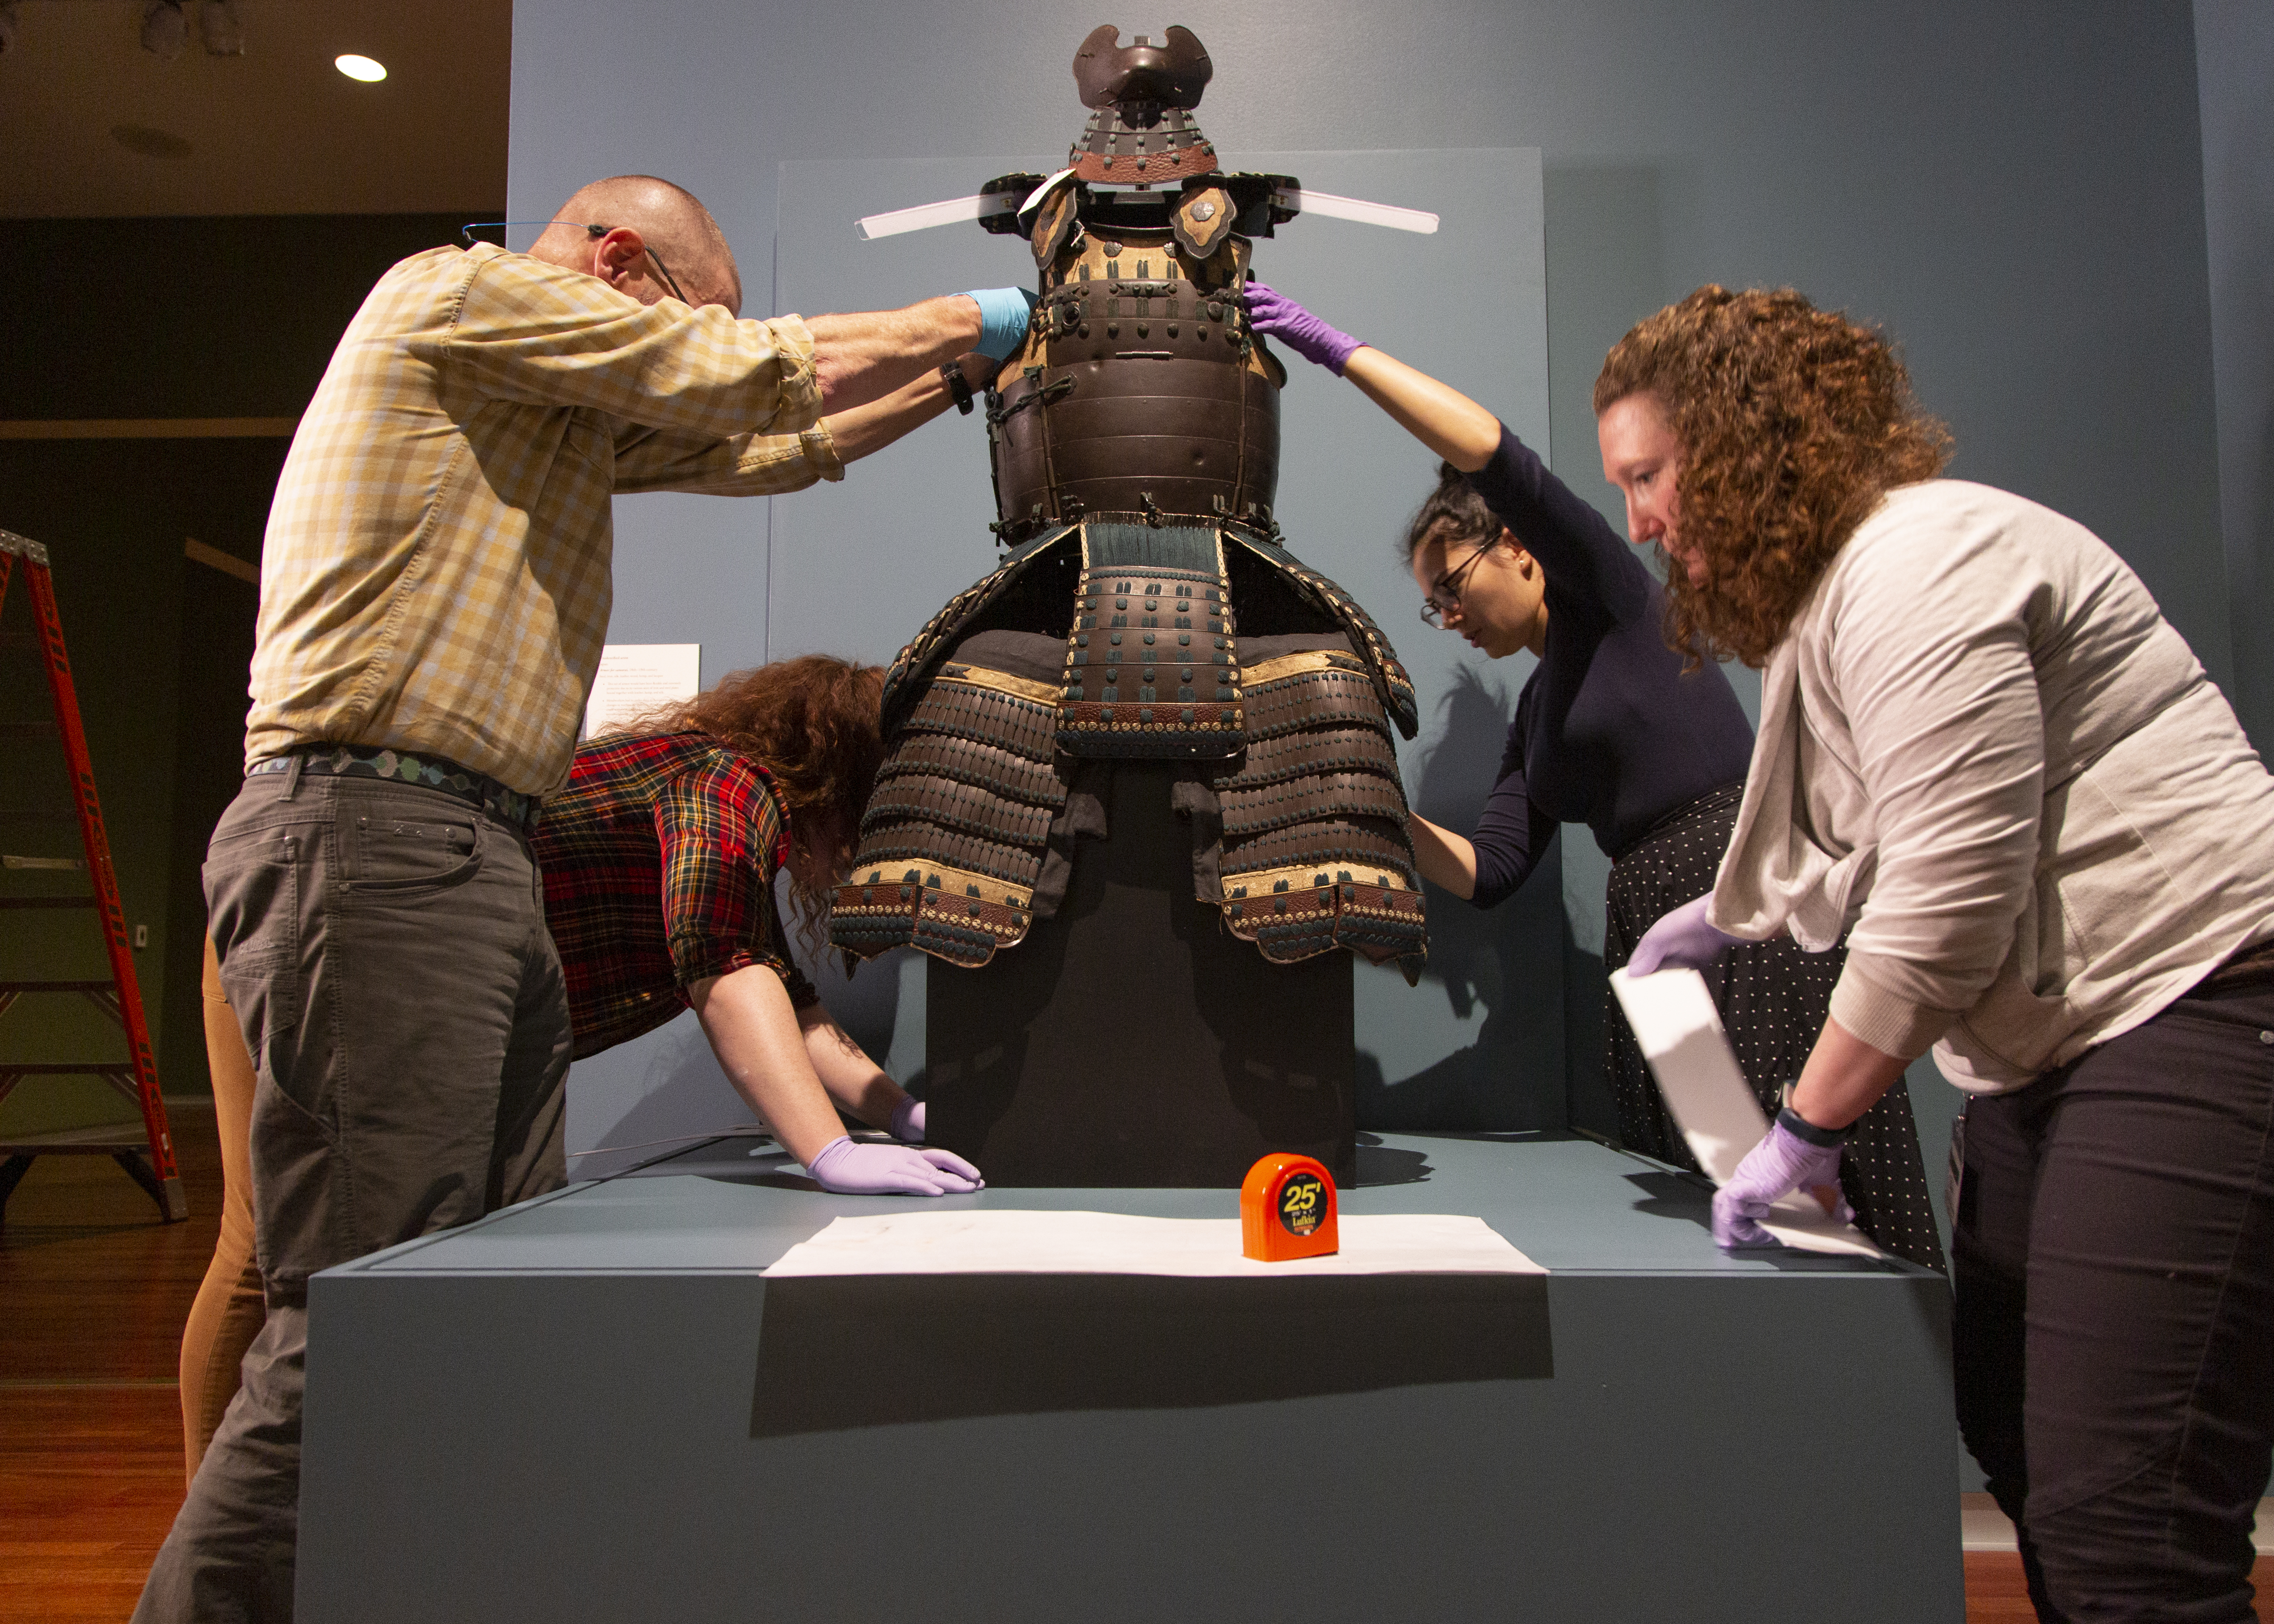 Preparing the Samurai Armor for exhibition required the help of more than 7 people. Here you see Collection’s staff sewing backing, preparing foam, and measuring armature.  